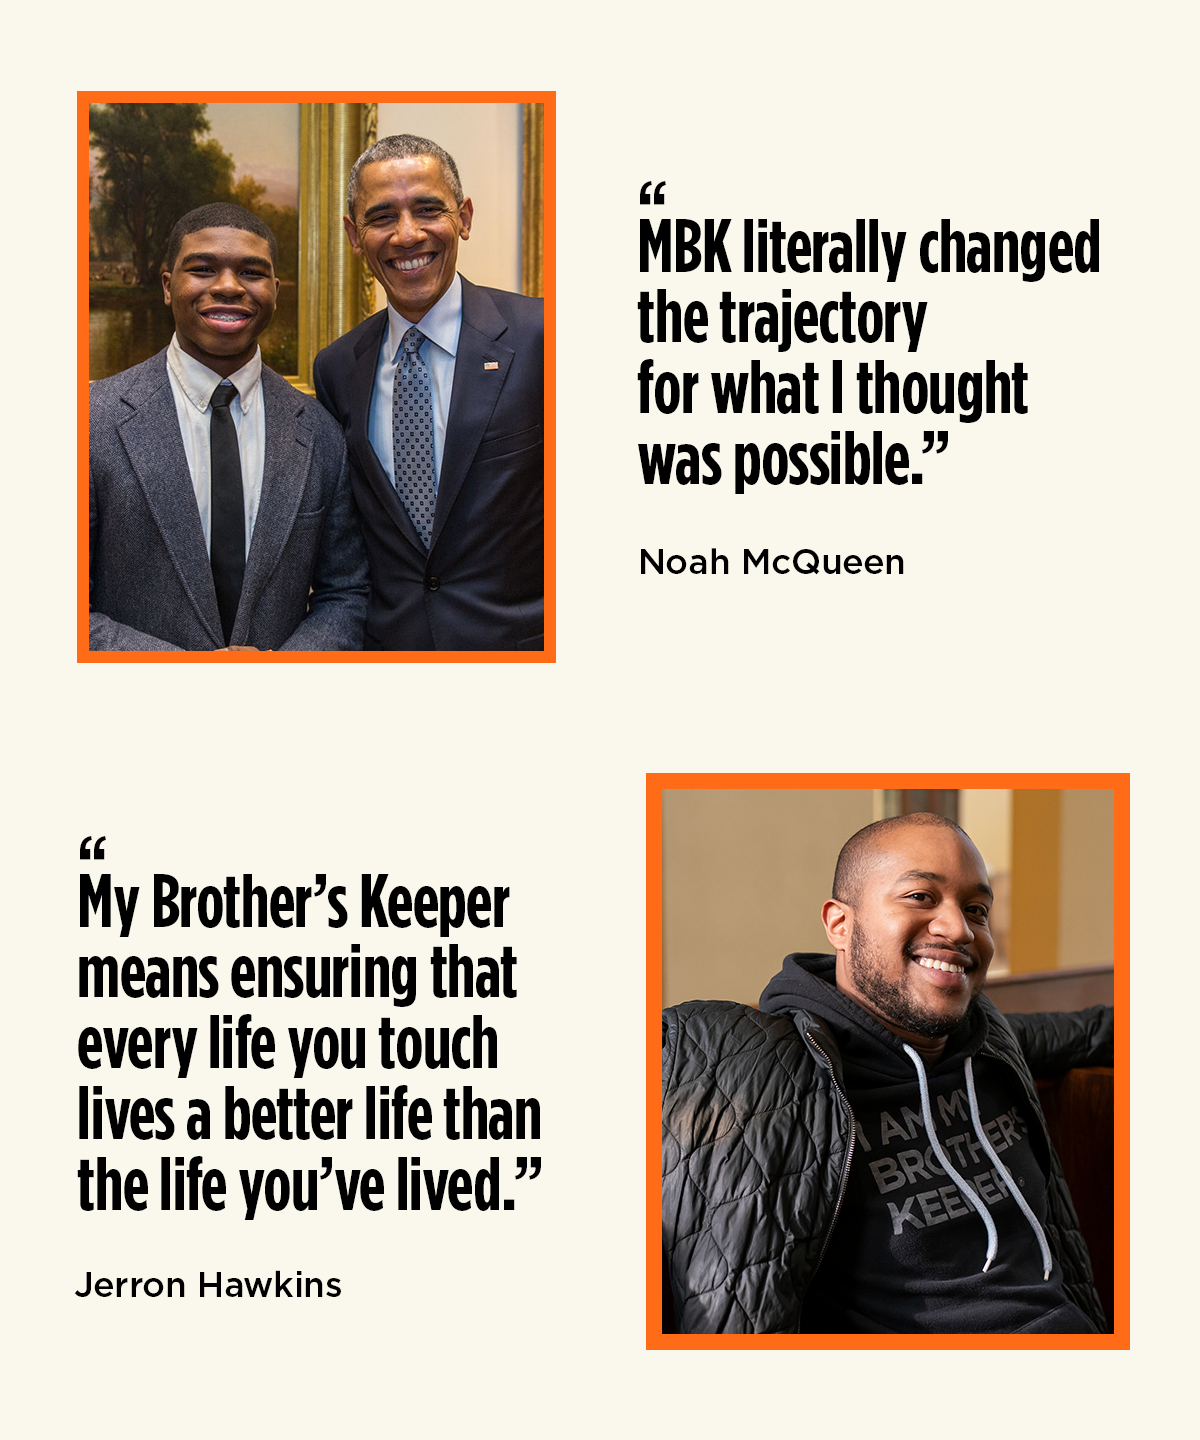 On the top, a photo of a Black man with a medium-light skintone smiling at the camera next to the quote "MBK literally changed the trajectory for what I thought was possible." - Jerron Hawkins, on the bottom, a photo of a young Black man with a dark skintone is smiling next to President Obama next to the quote "My Brother's Keeper means that ensuring that every life you touch lives a better life than the life you've lived." - Noah McQueen